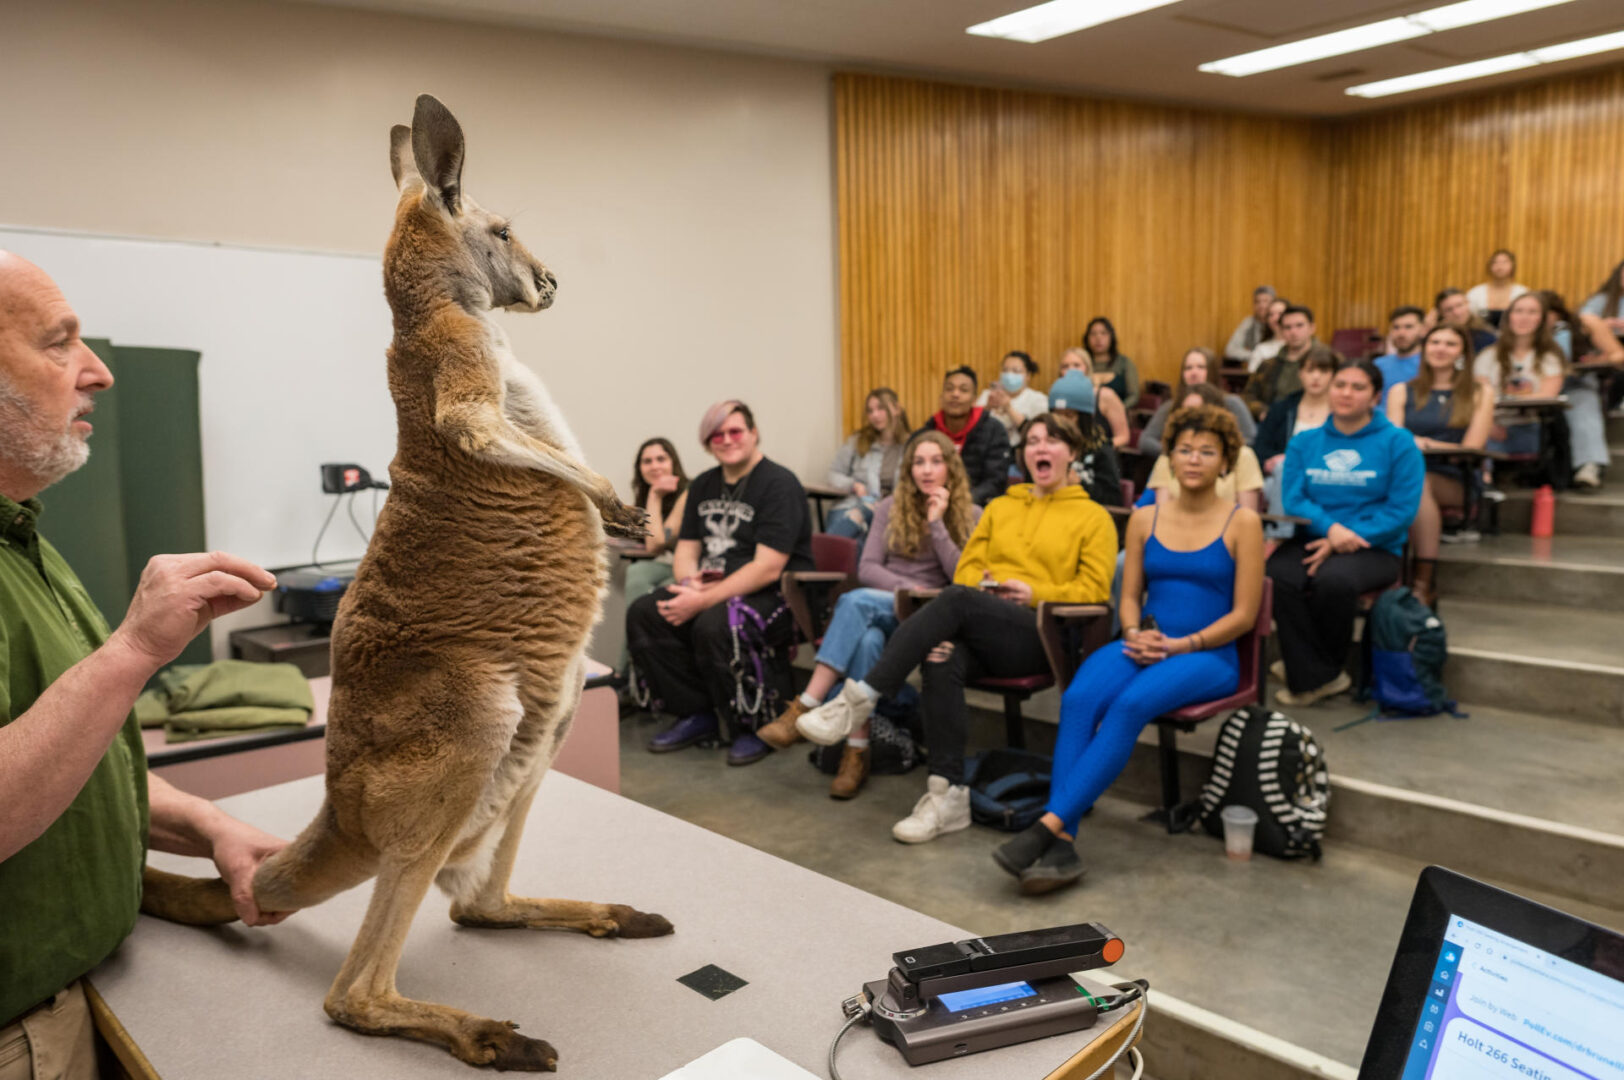 A kangaroo stands on a desk at the front of a crowded college class.